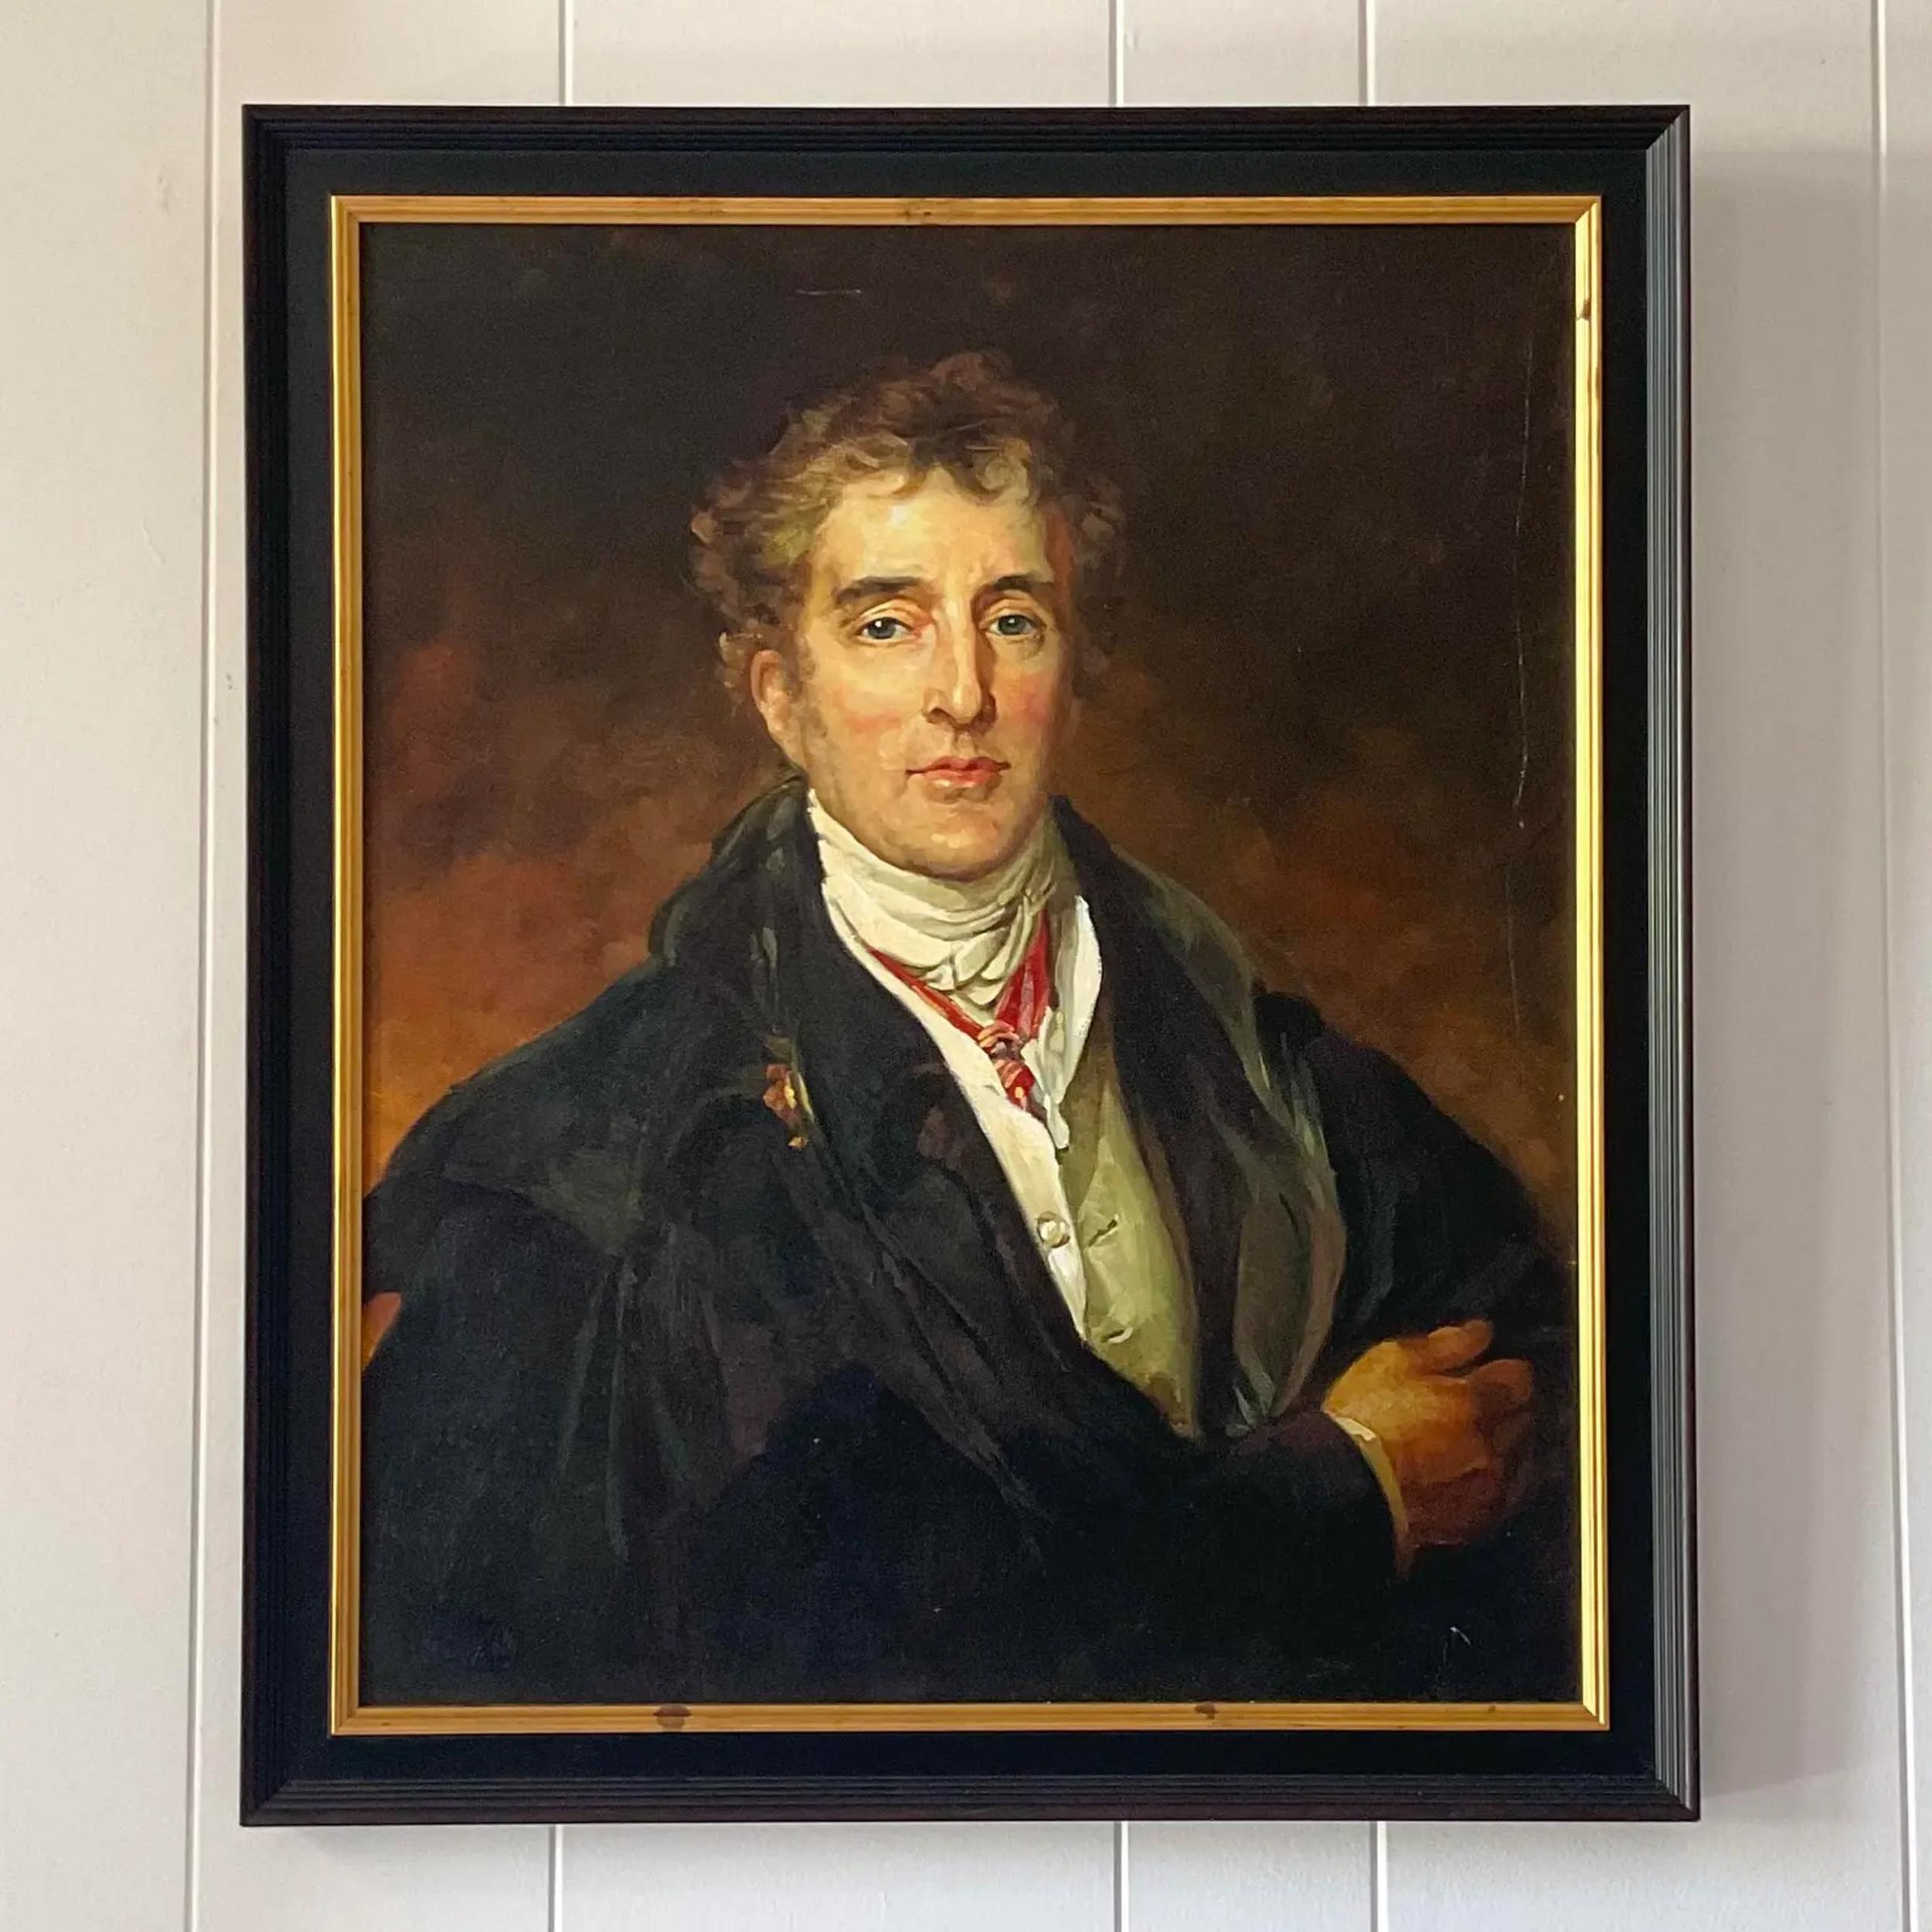 A fabulous vintage original oil portrait on canvas. A classic composition of a well dressed nobleman. Unsigned. Acquired from a Palm Beach estate.